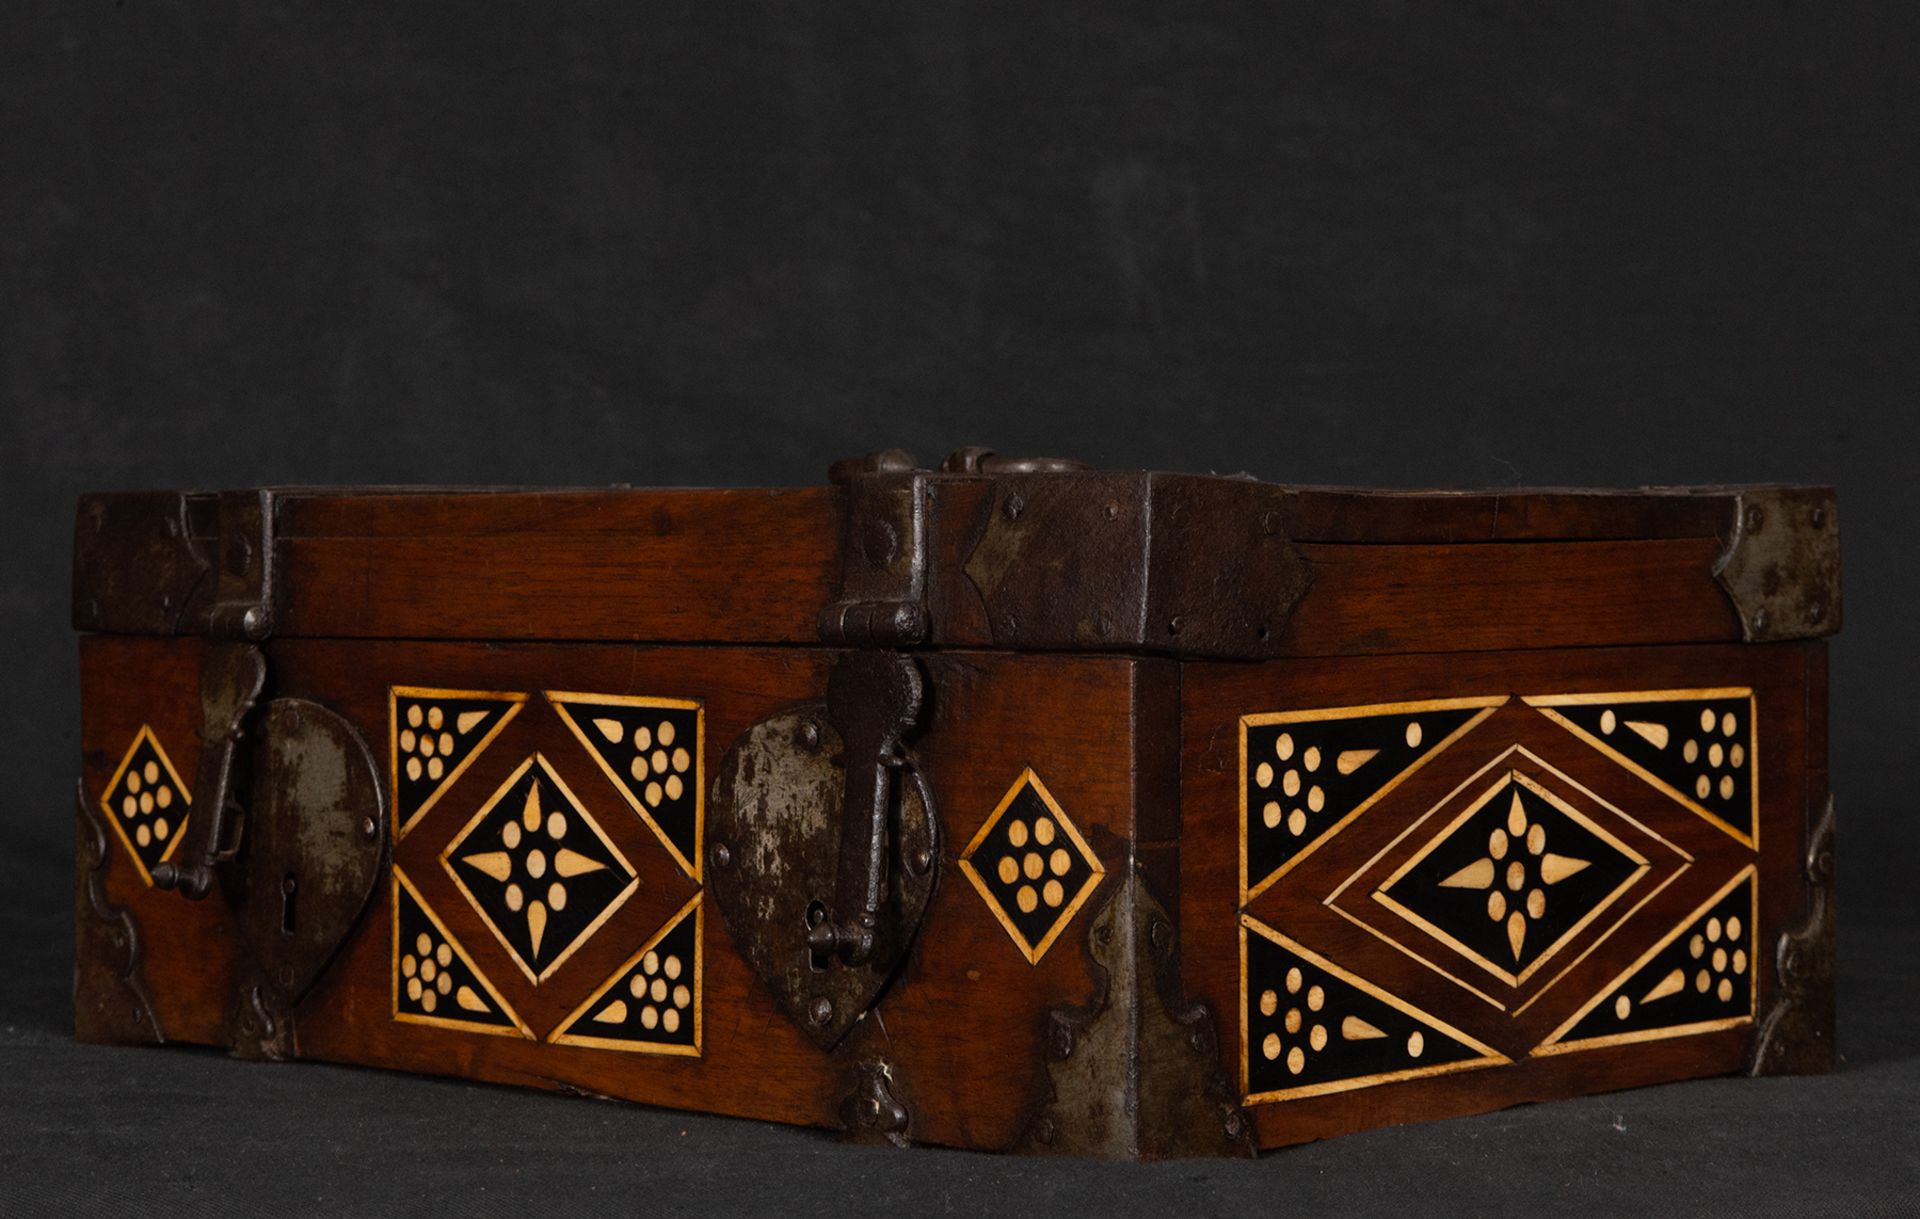 Document Holder or English Colonial Ship's Chest, South India, 18th century - Bild 2 aus 2